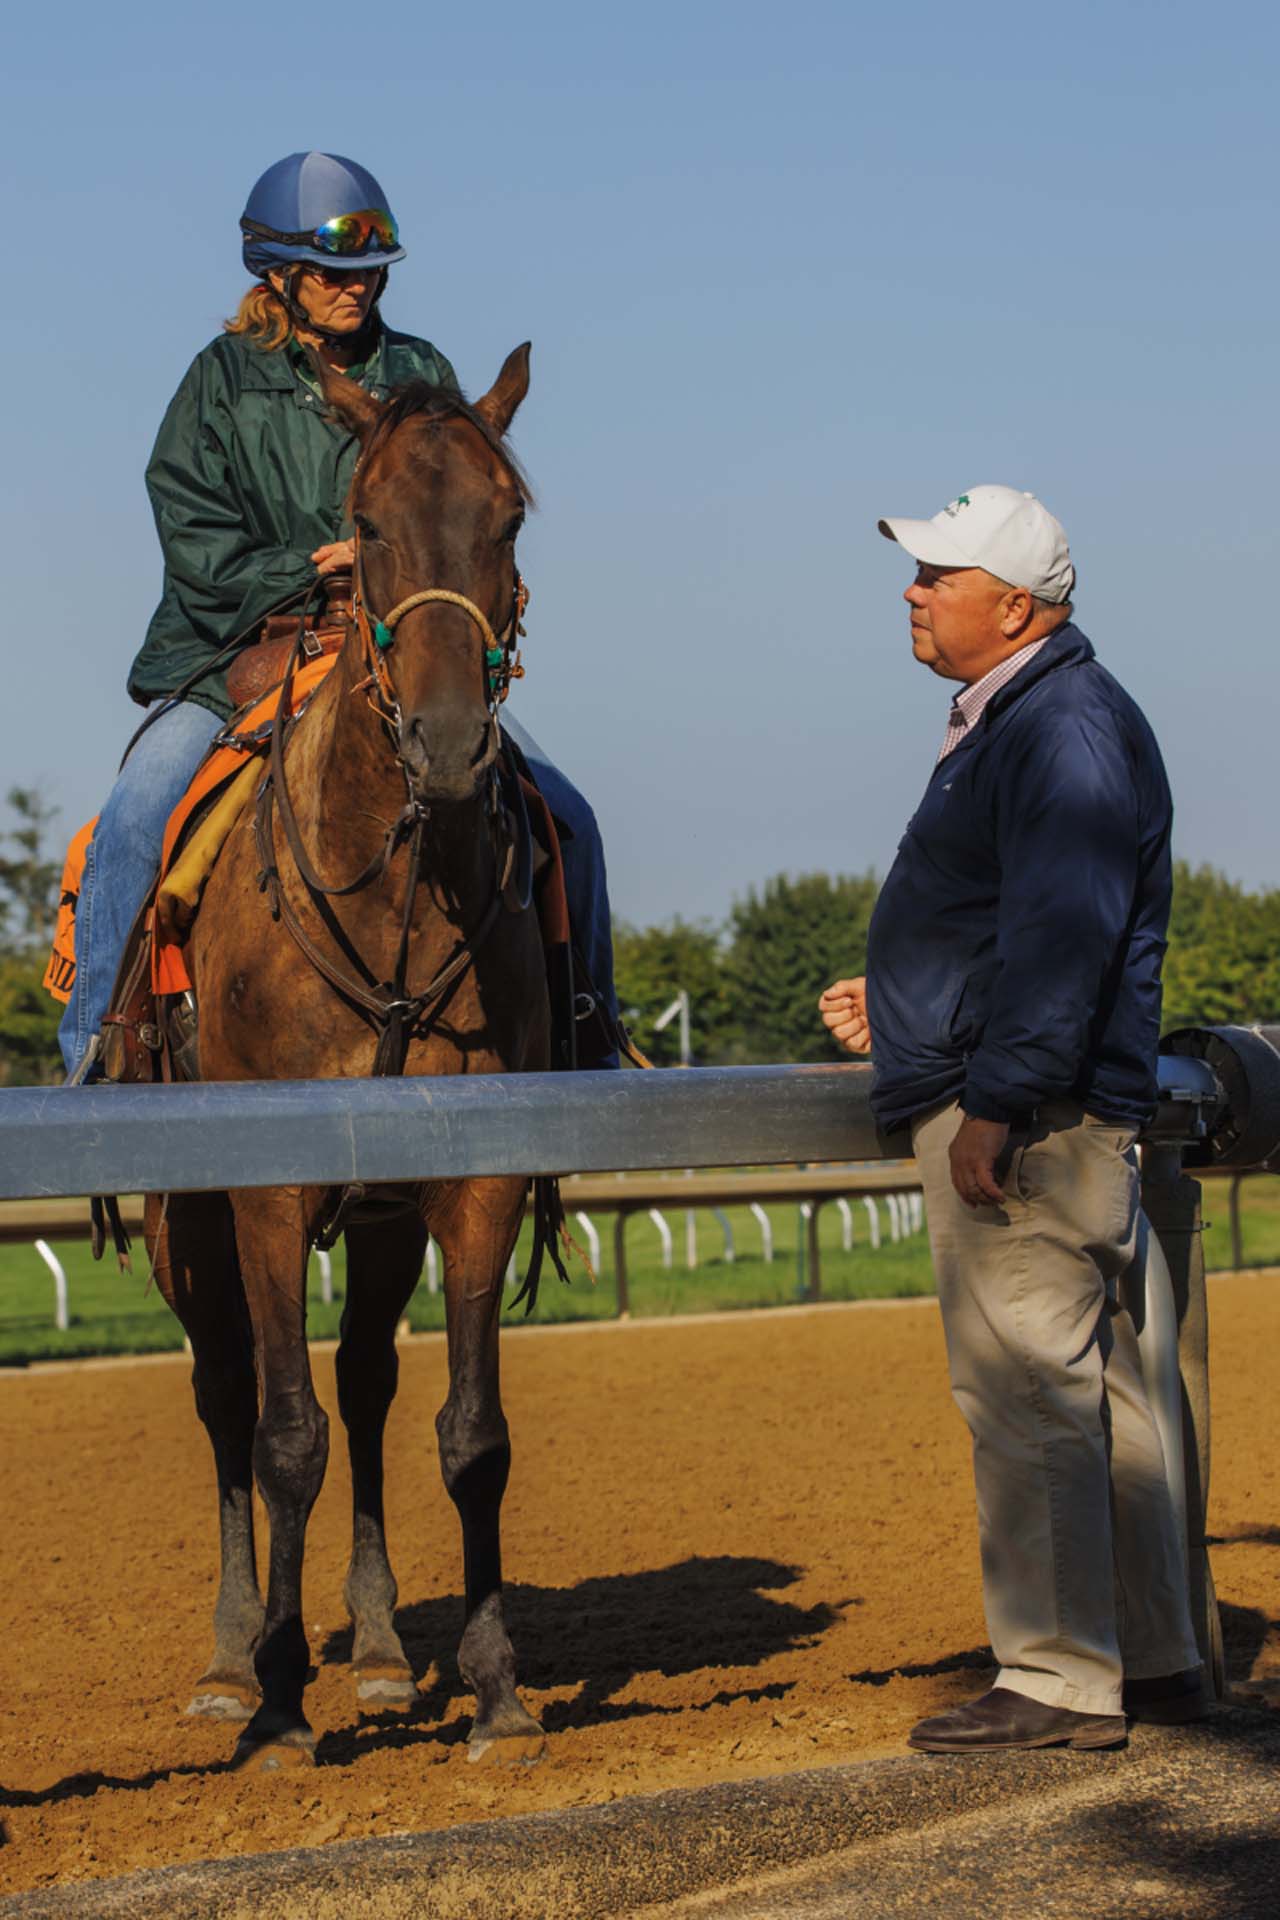 A candid photo of Dr. Stuart Brown leaning on a rail while talking to a woman who is riding a horse on the track. He is an older White man wearing a white hat, a navy pullover sweater, and khakis.